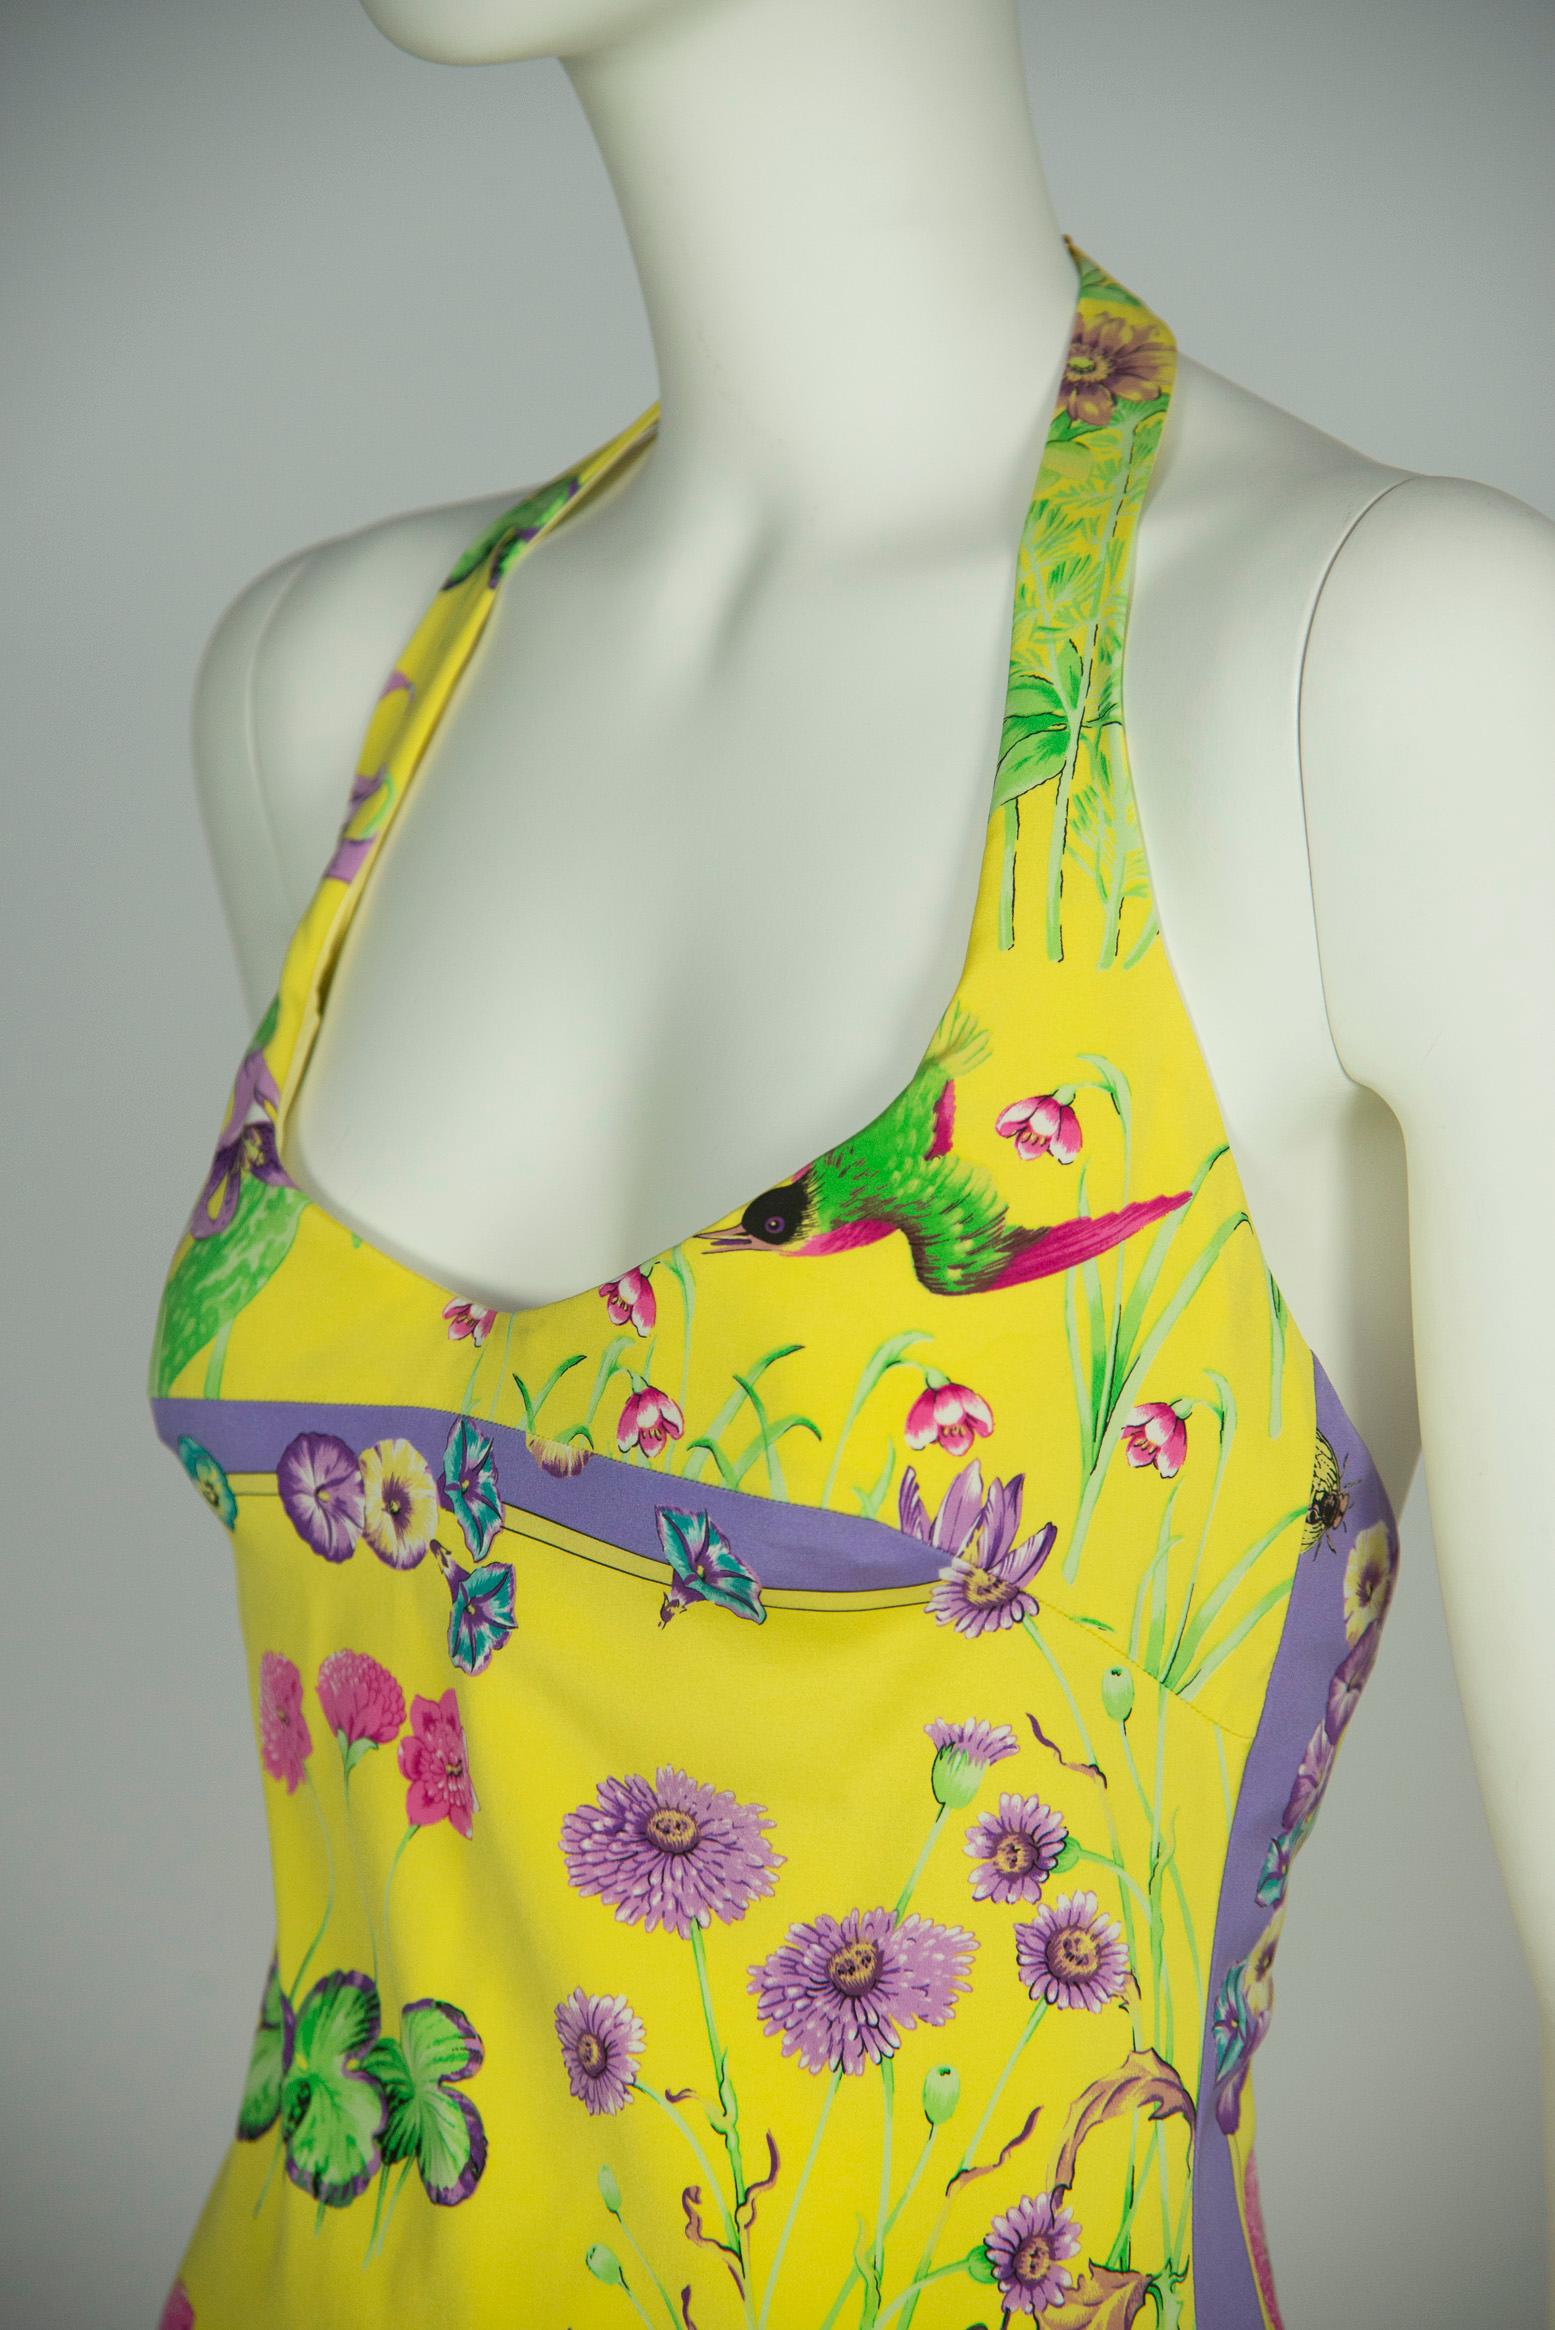 Gianni Versace Couture Printed Halterneck Dress, Circa 1995-1996 For Sale 3